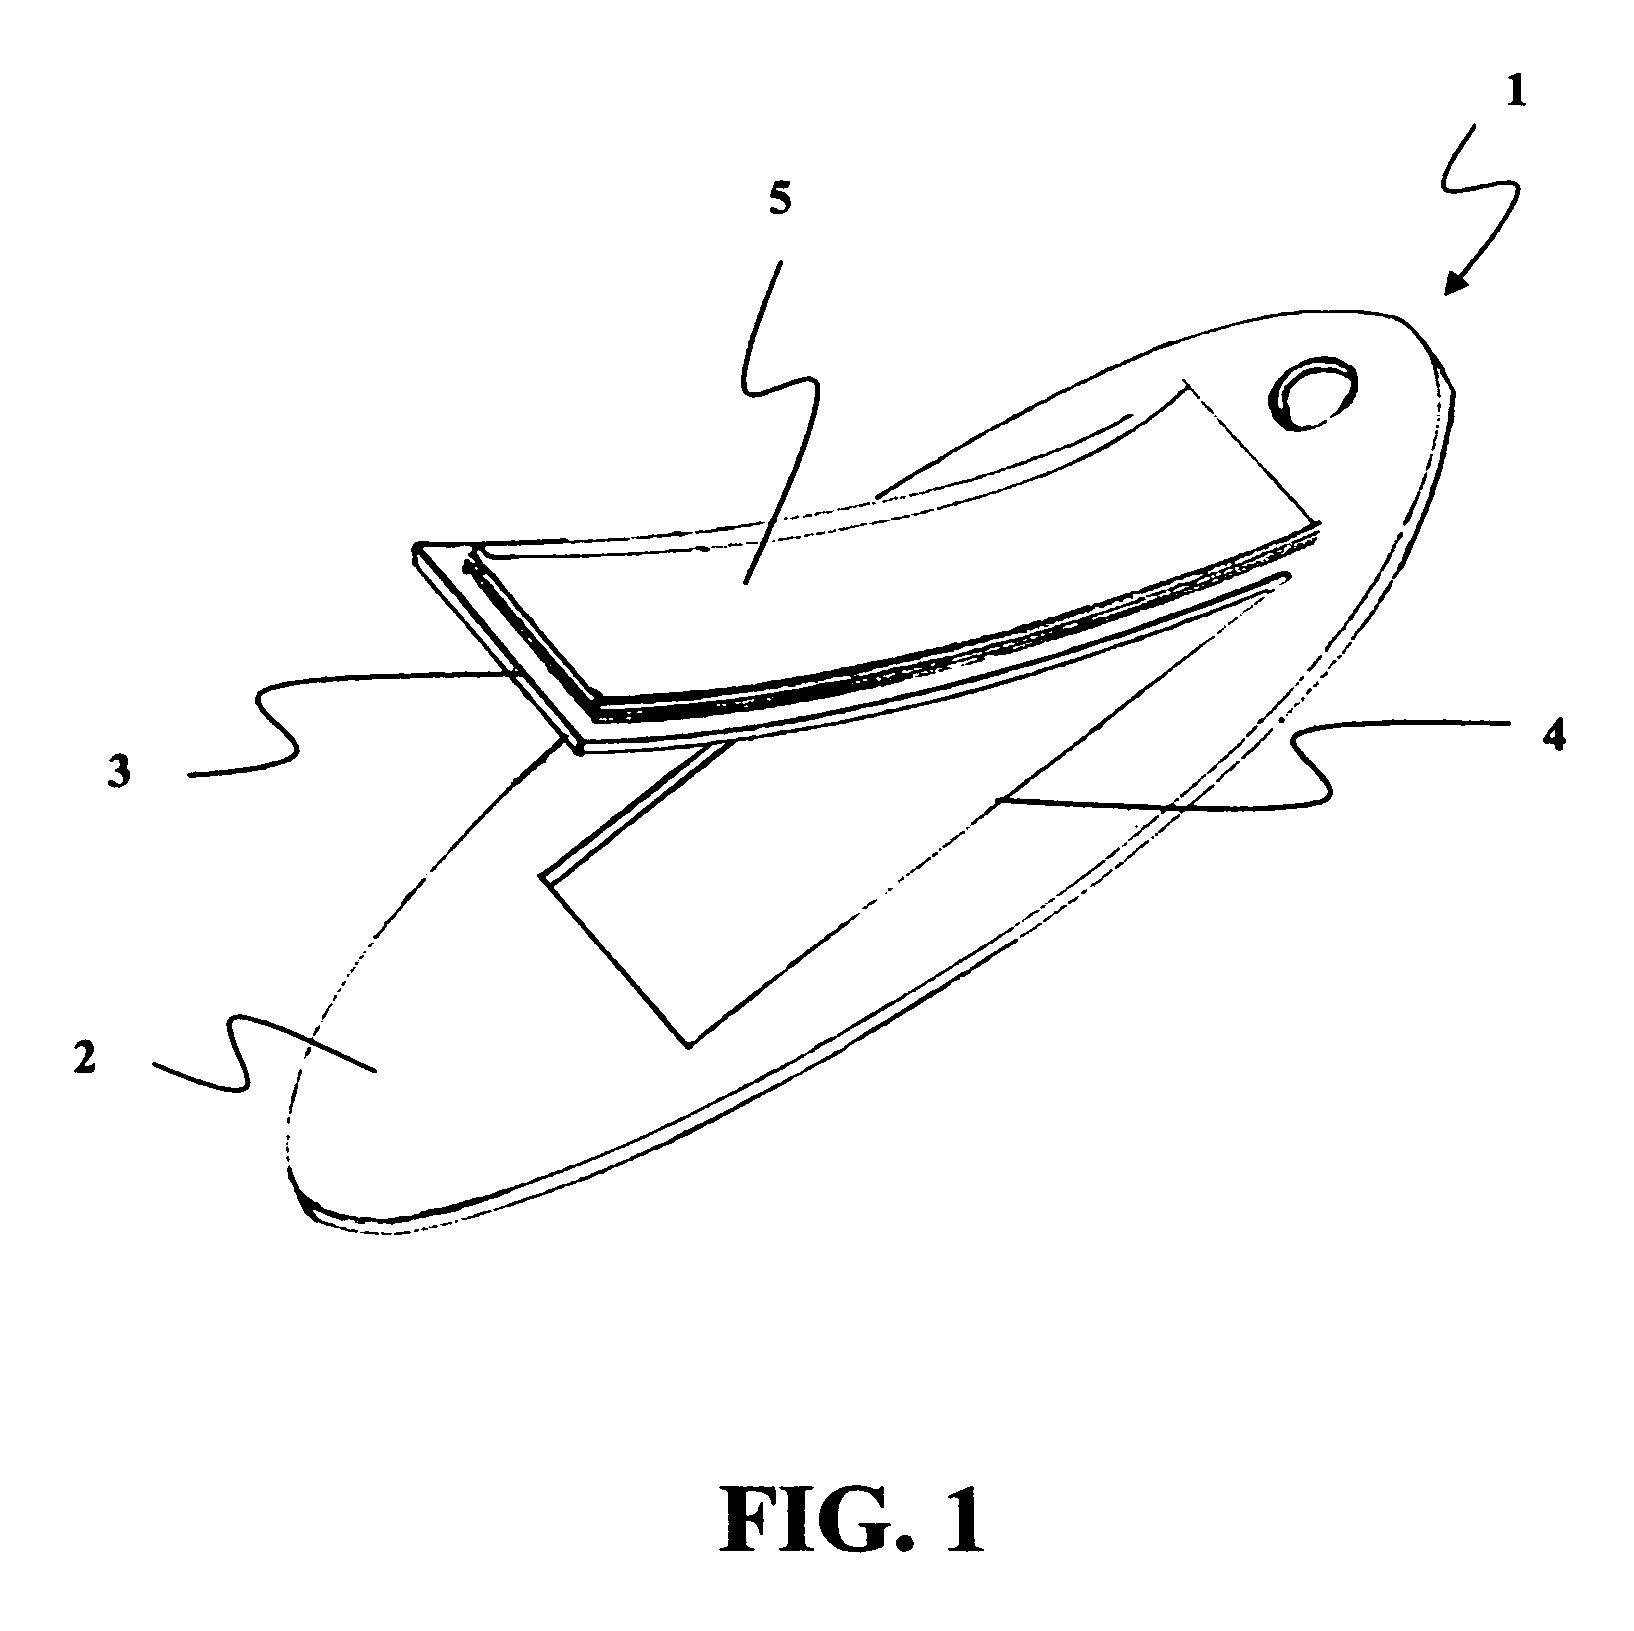 Book marking and note taking apparatus